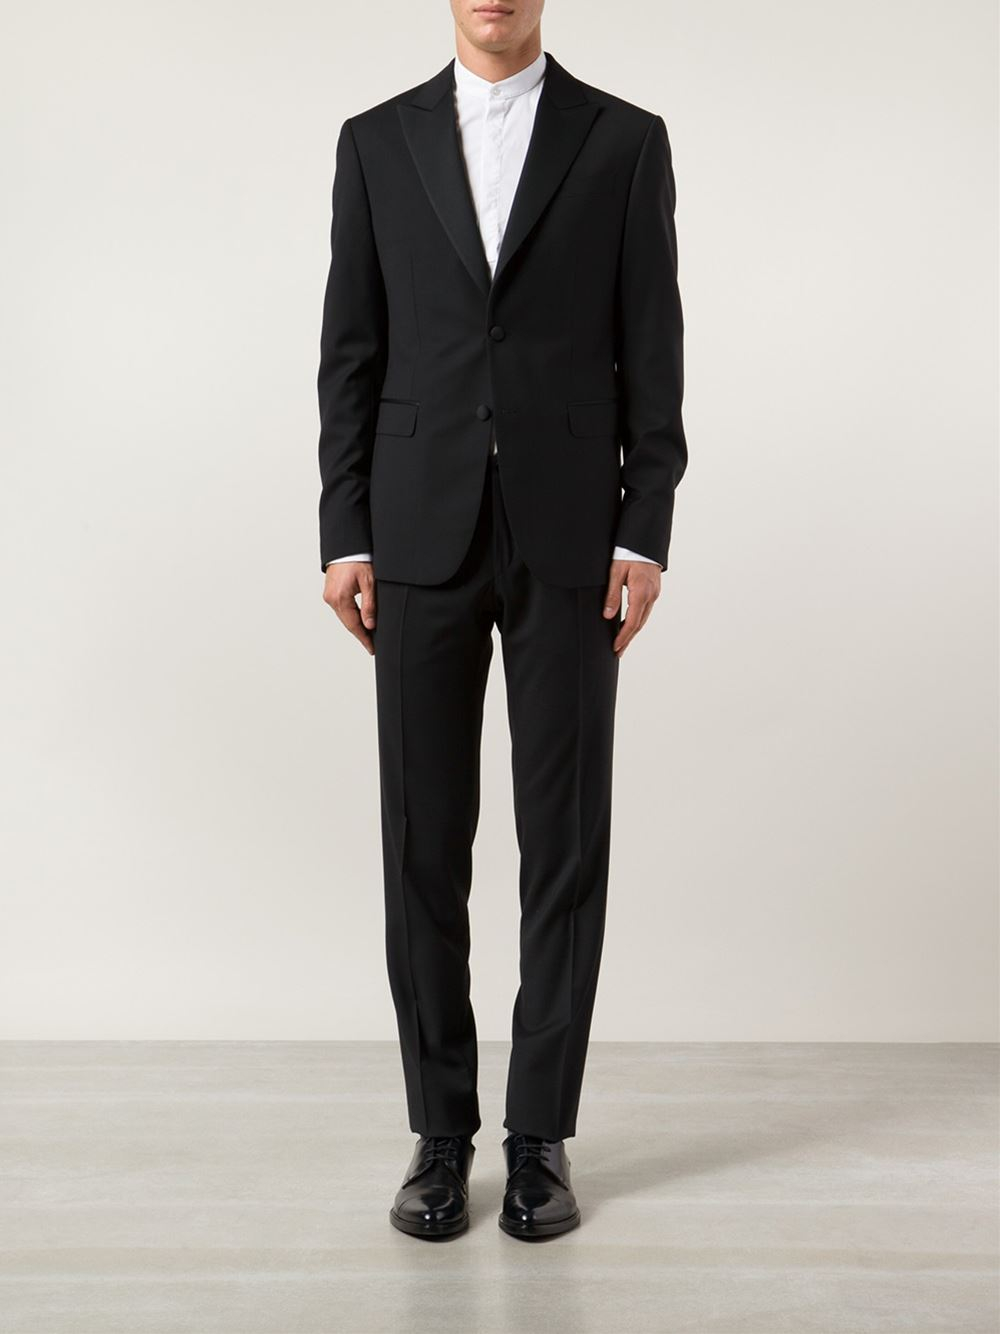 Moschino Cut-Out Smiley Dinner Suit in Black for Men | Lyst